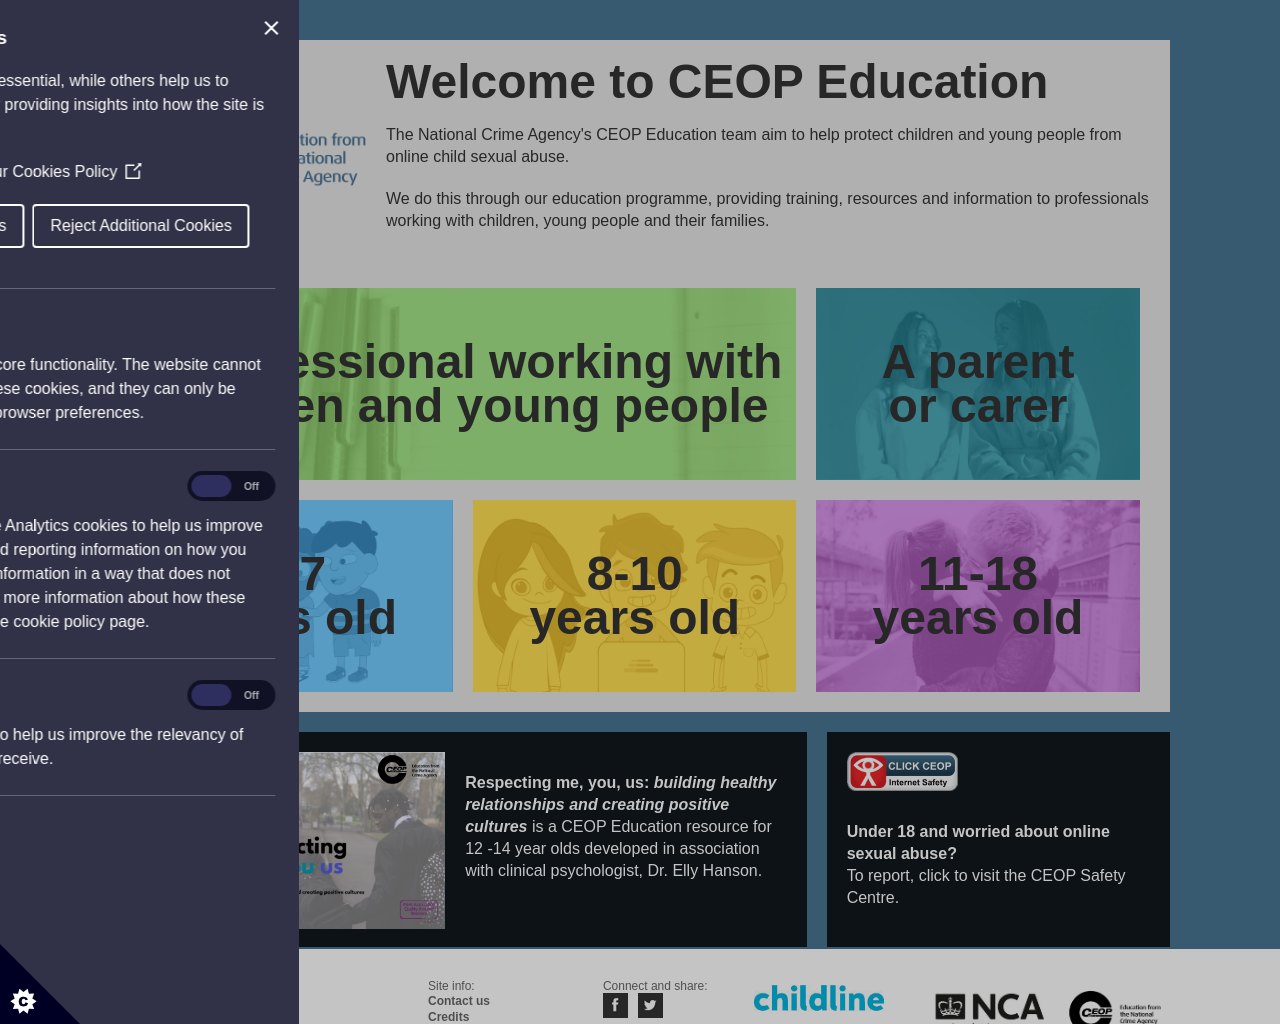 Internet Safety Advice from CEOP